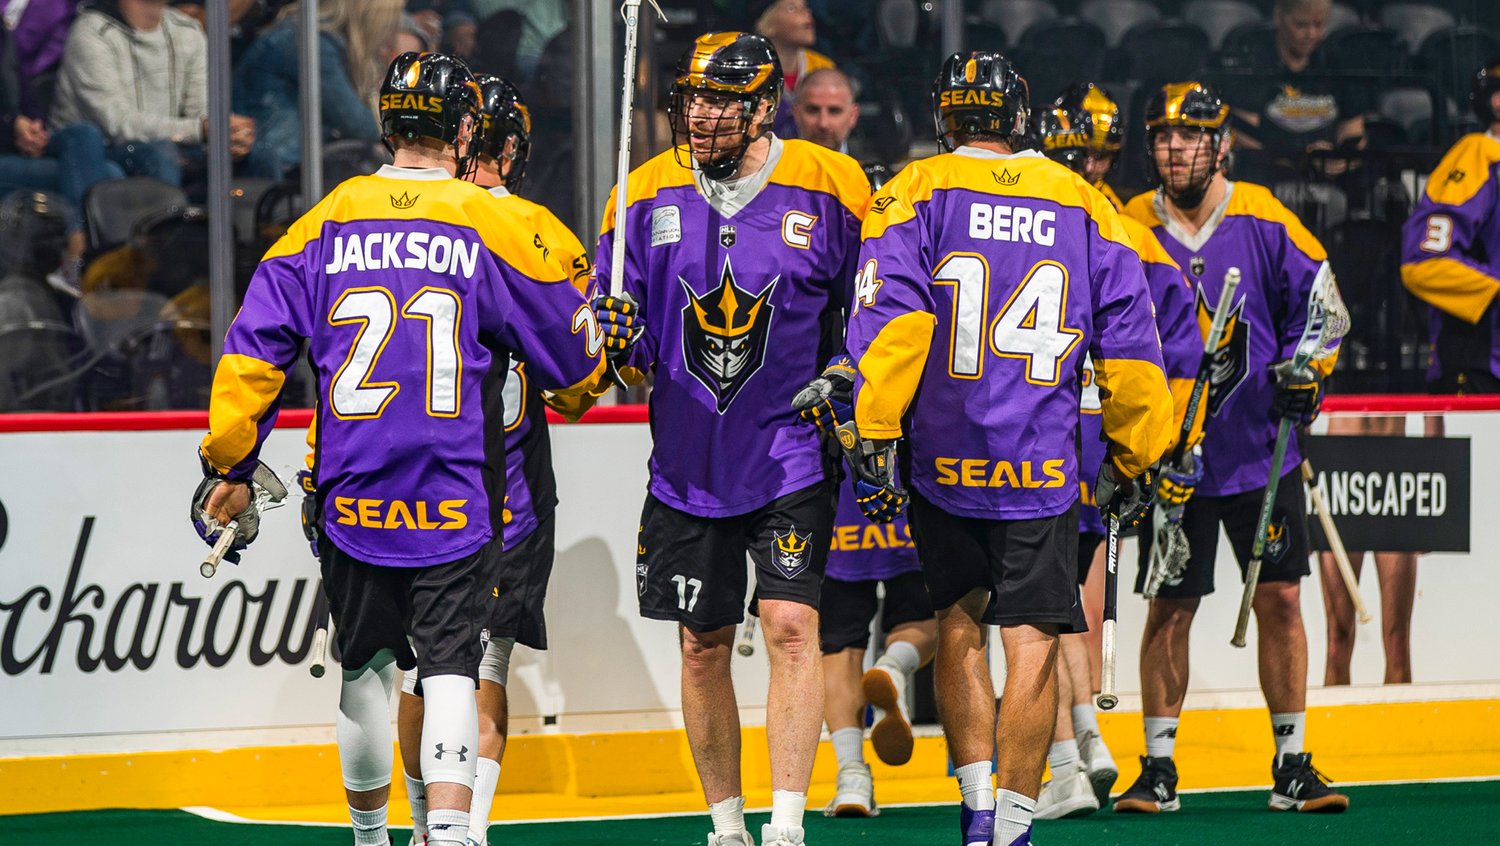 Who are the San Diego Seals?